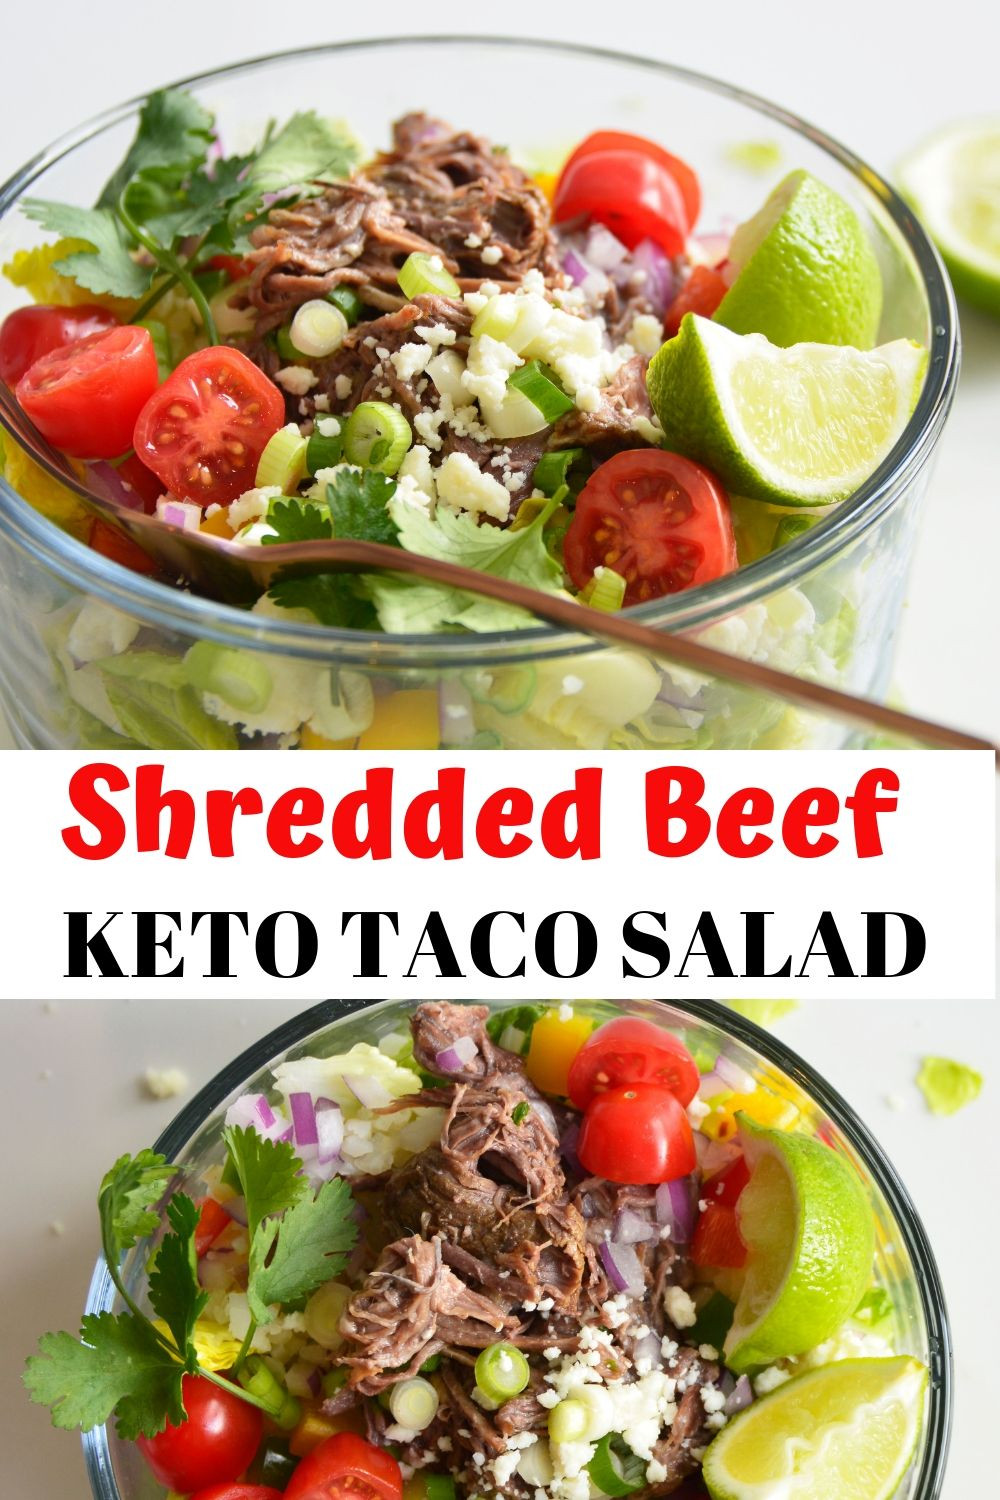 Pulled Beef Keto
 Shredded Beef Keto Taco Salad Recipe The Keto Queens